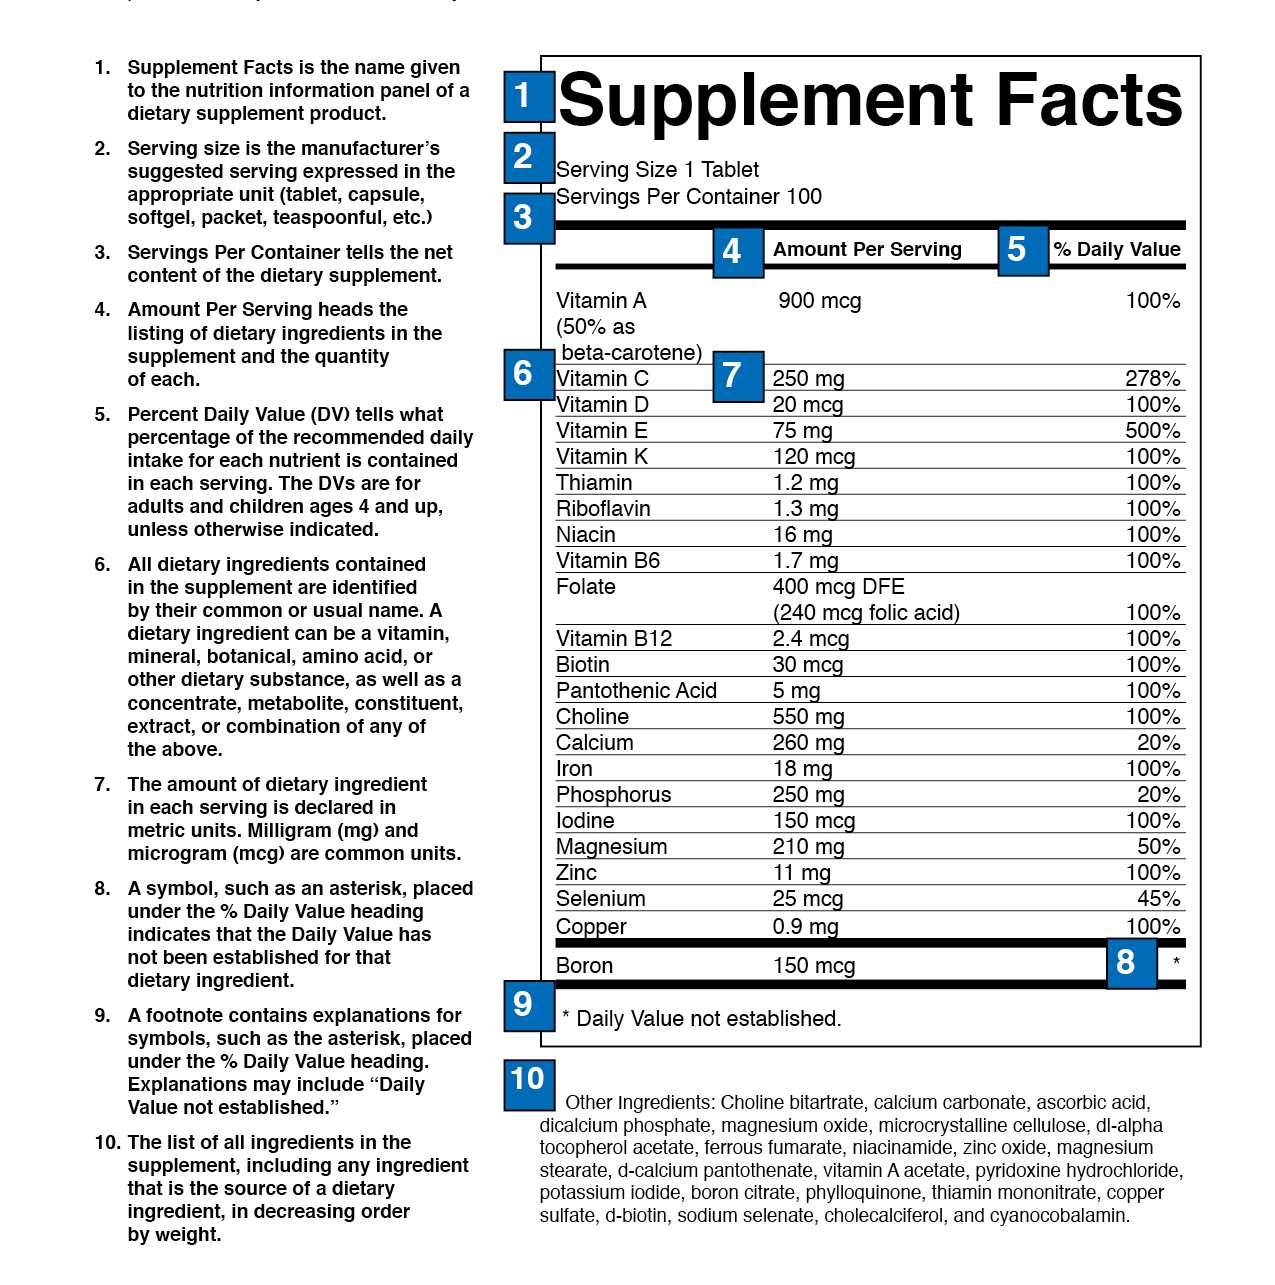 How-to-Read-Supplement-Label.jpg